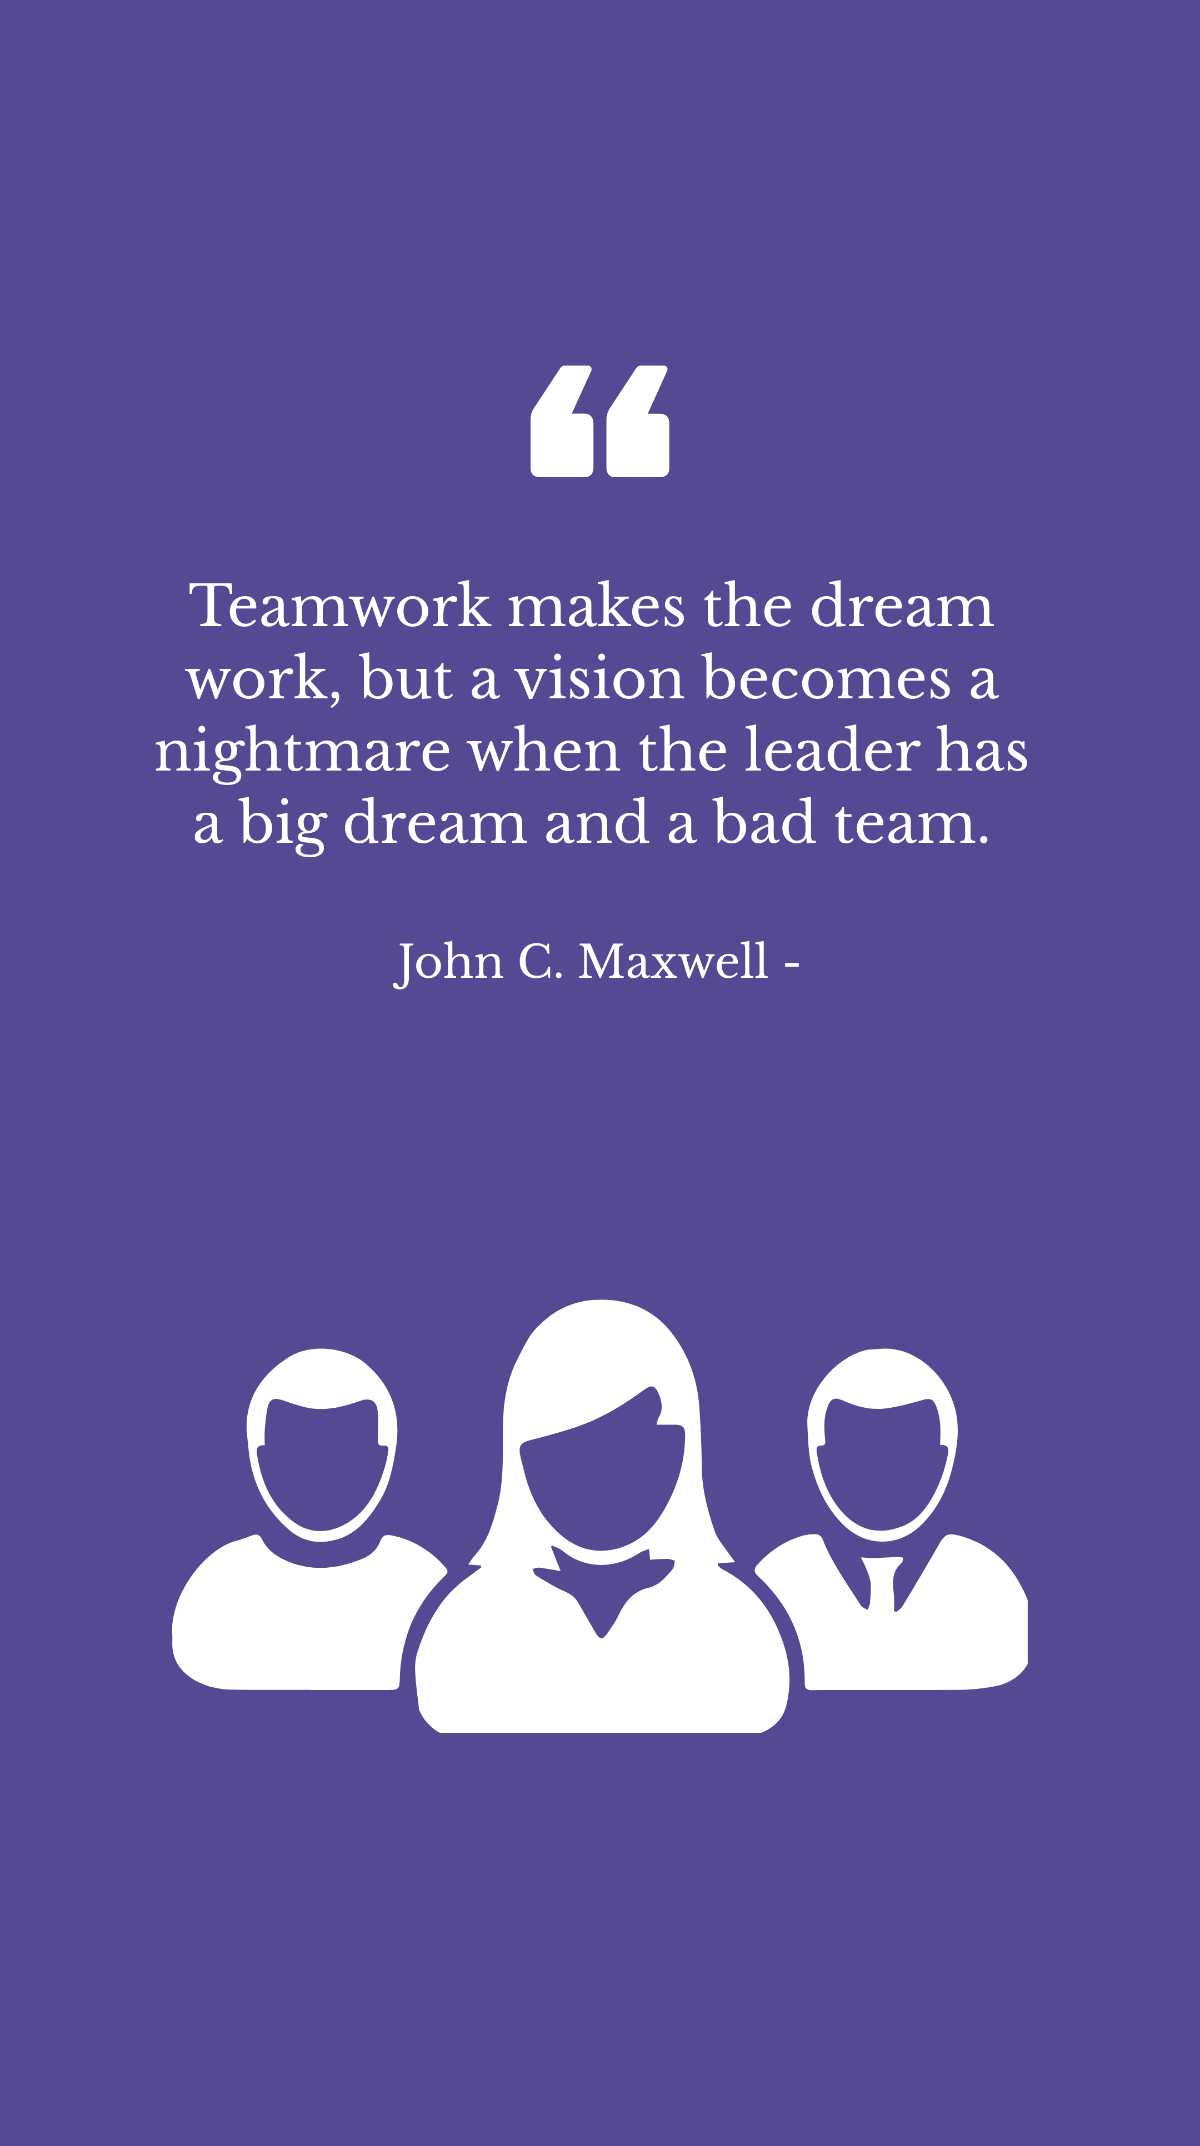 Free John C. Maxwell - Teamwork makes the dream work, but a vision becomes a nightmare when the leader has a big dream and a bad team. Template